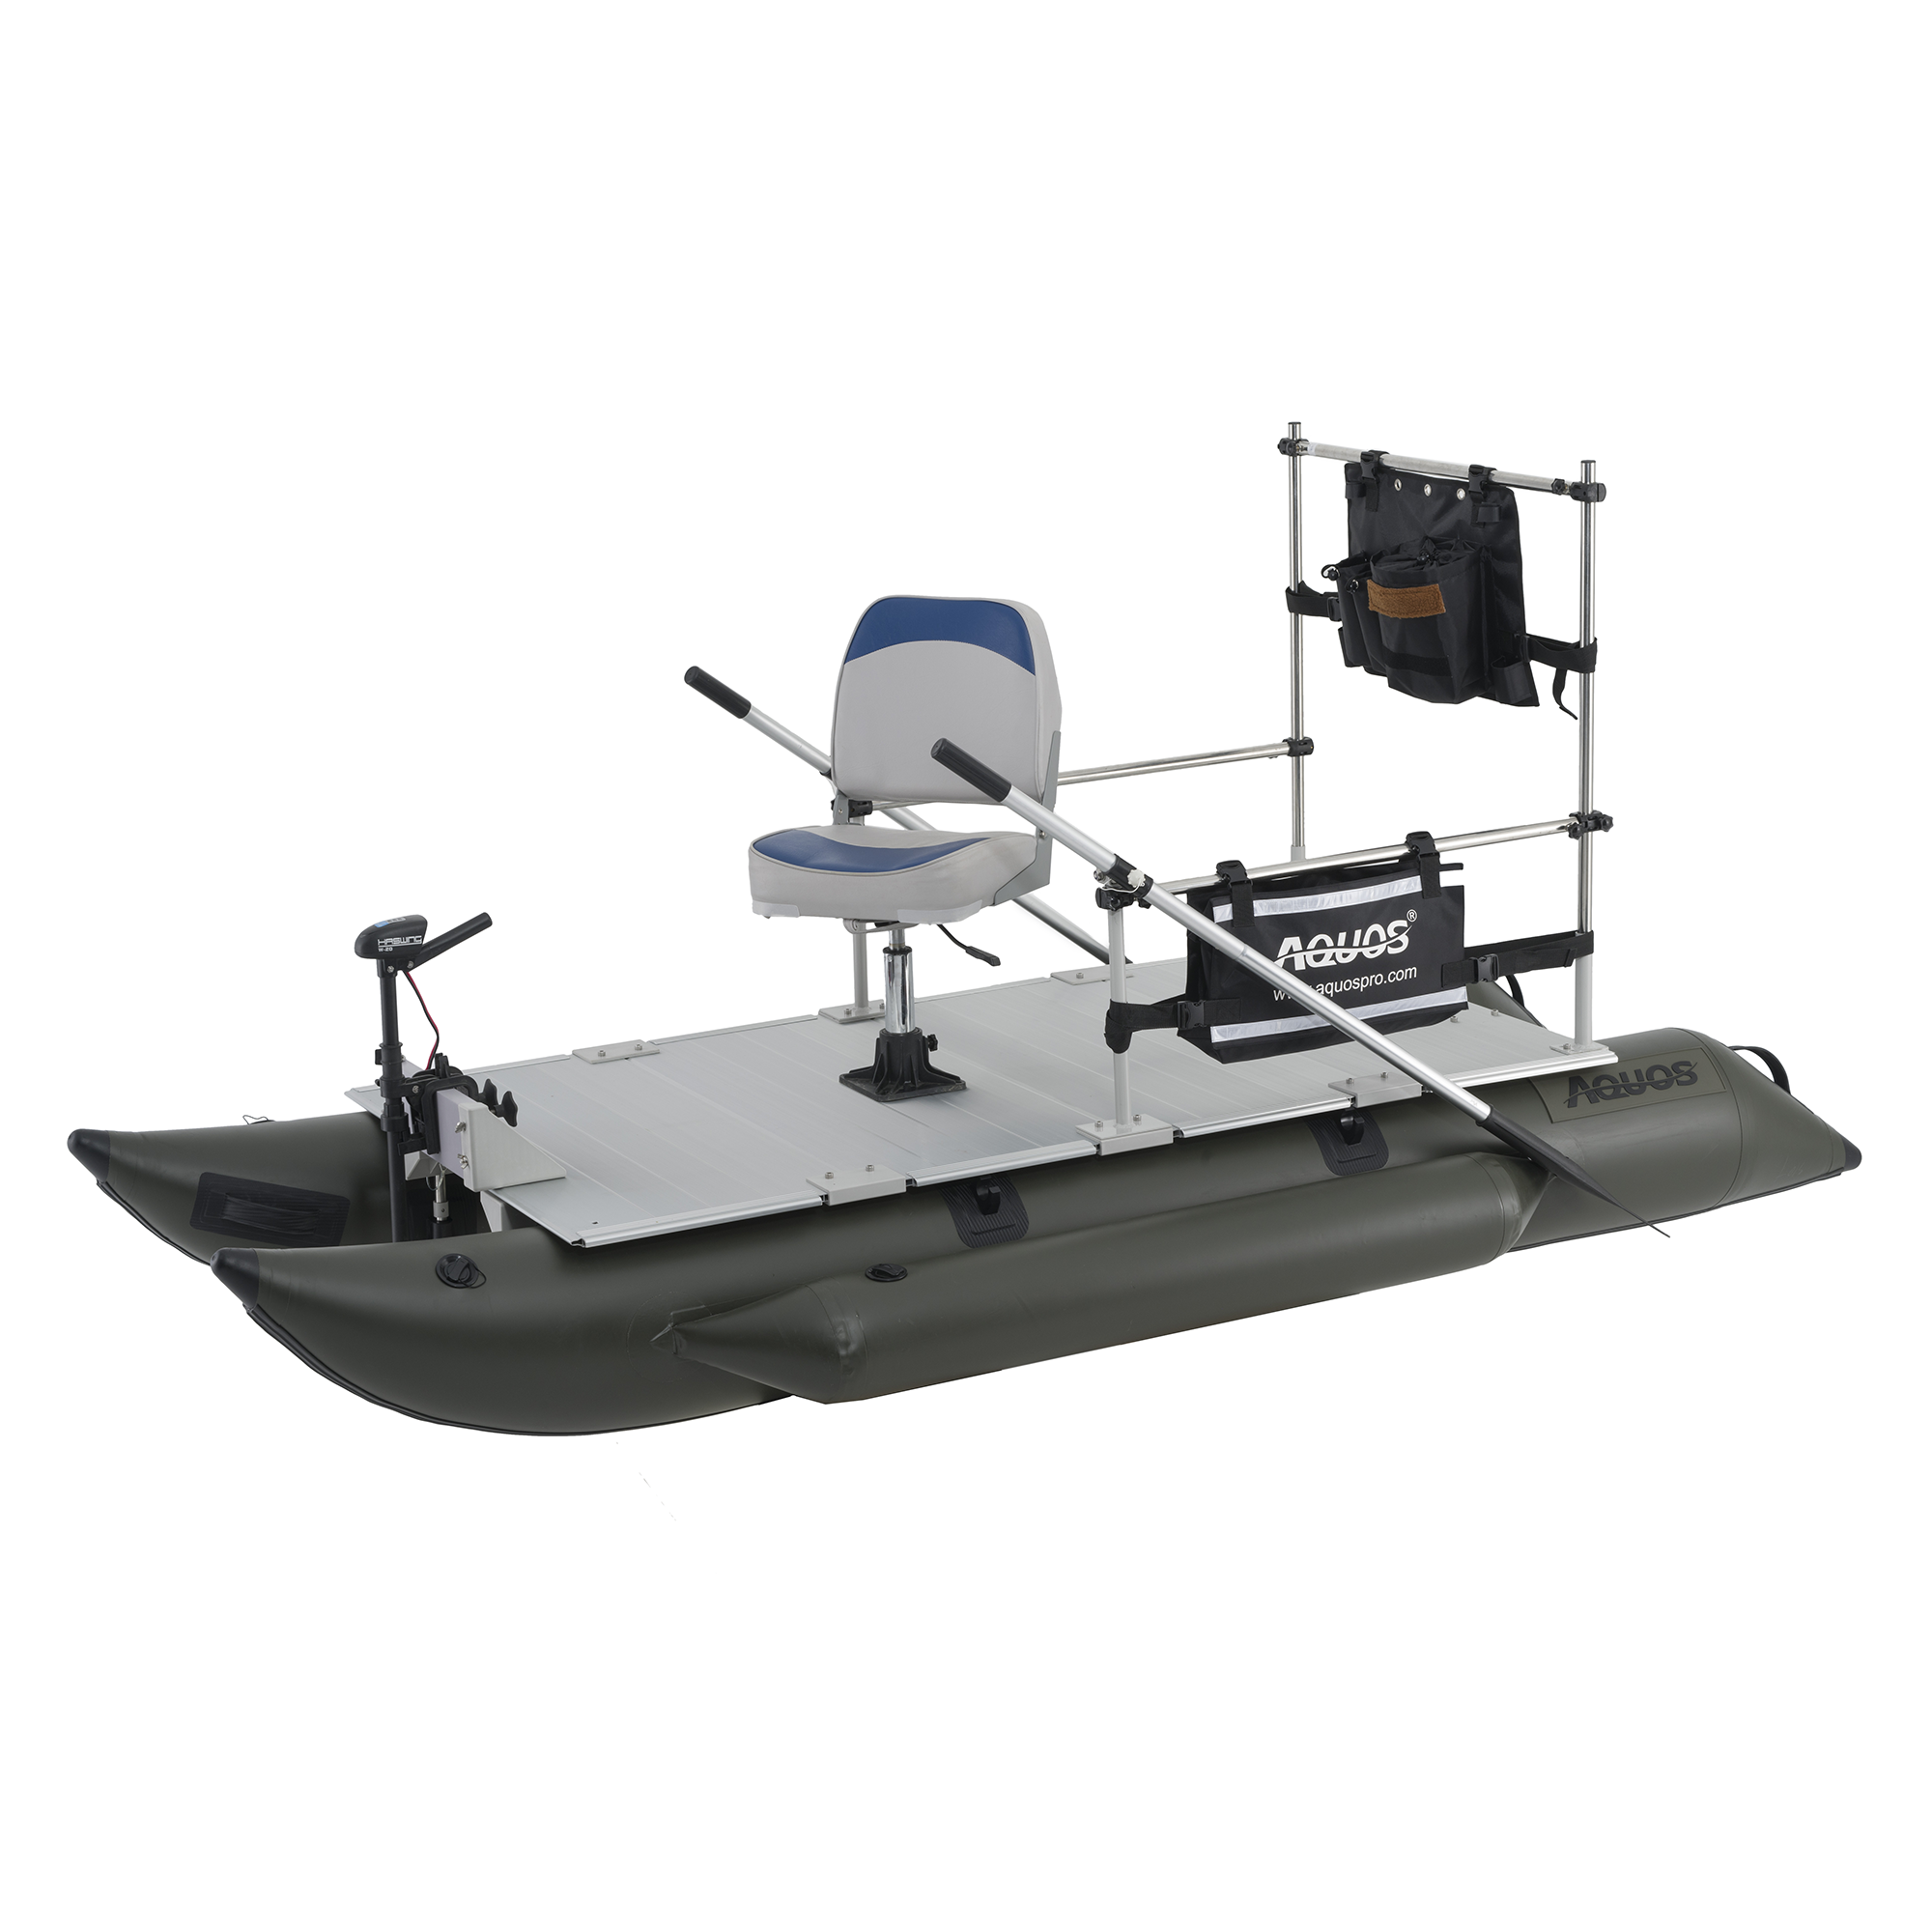 AQUOS New Heavy-Duty for One Series 10.2plus ft Inflatable Pontoon Boa –  AQUOSPRO